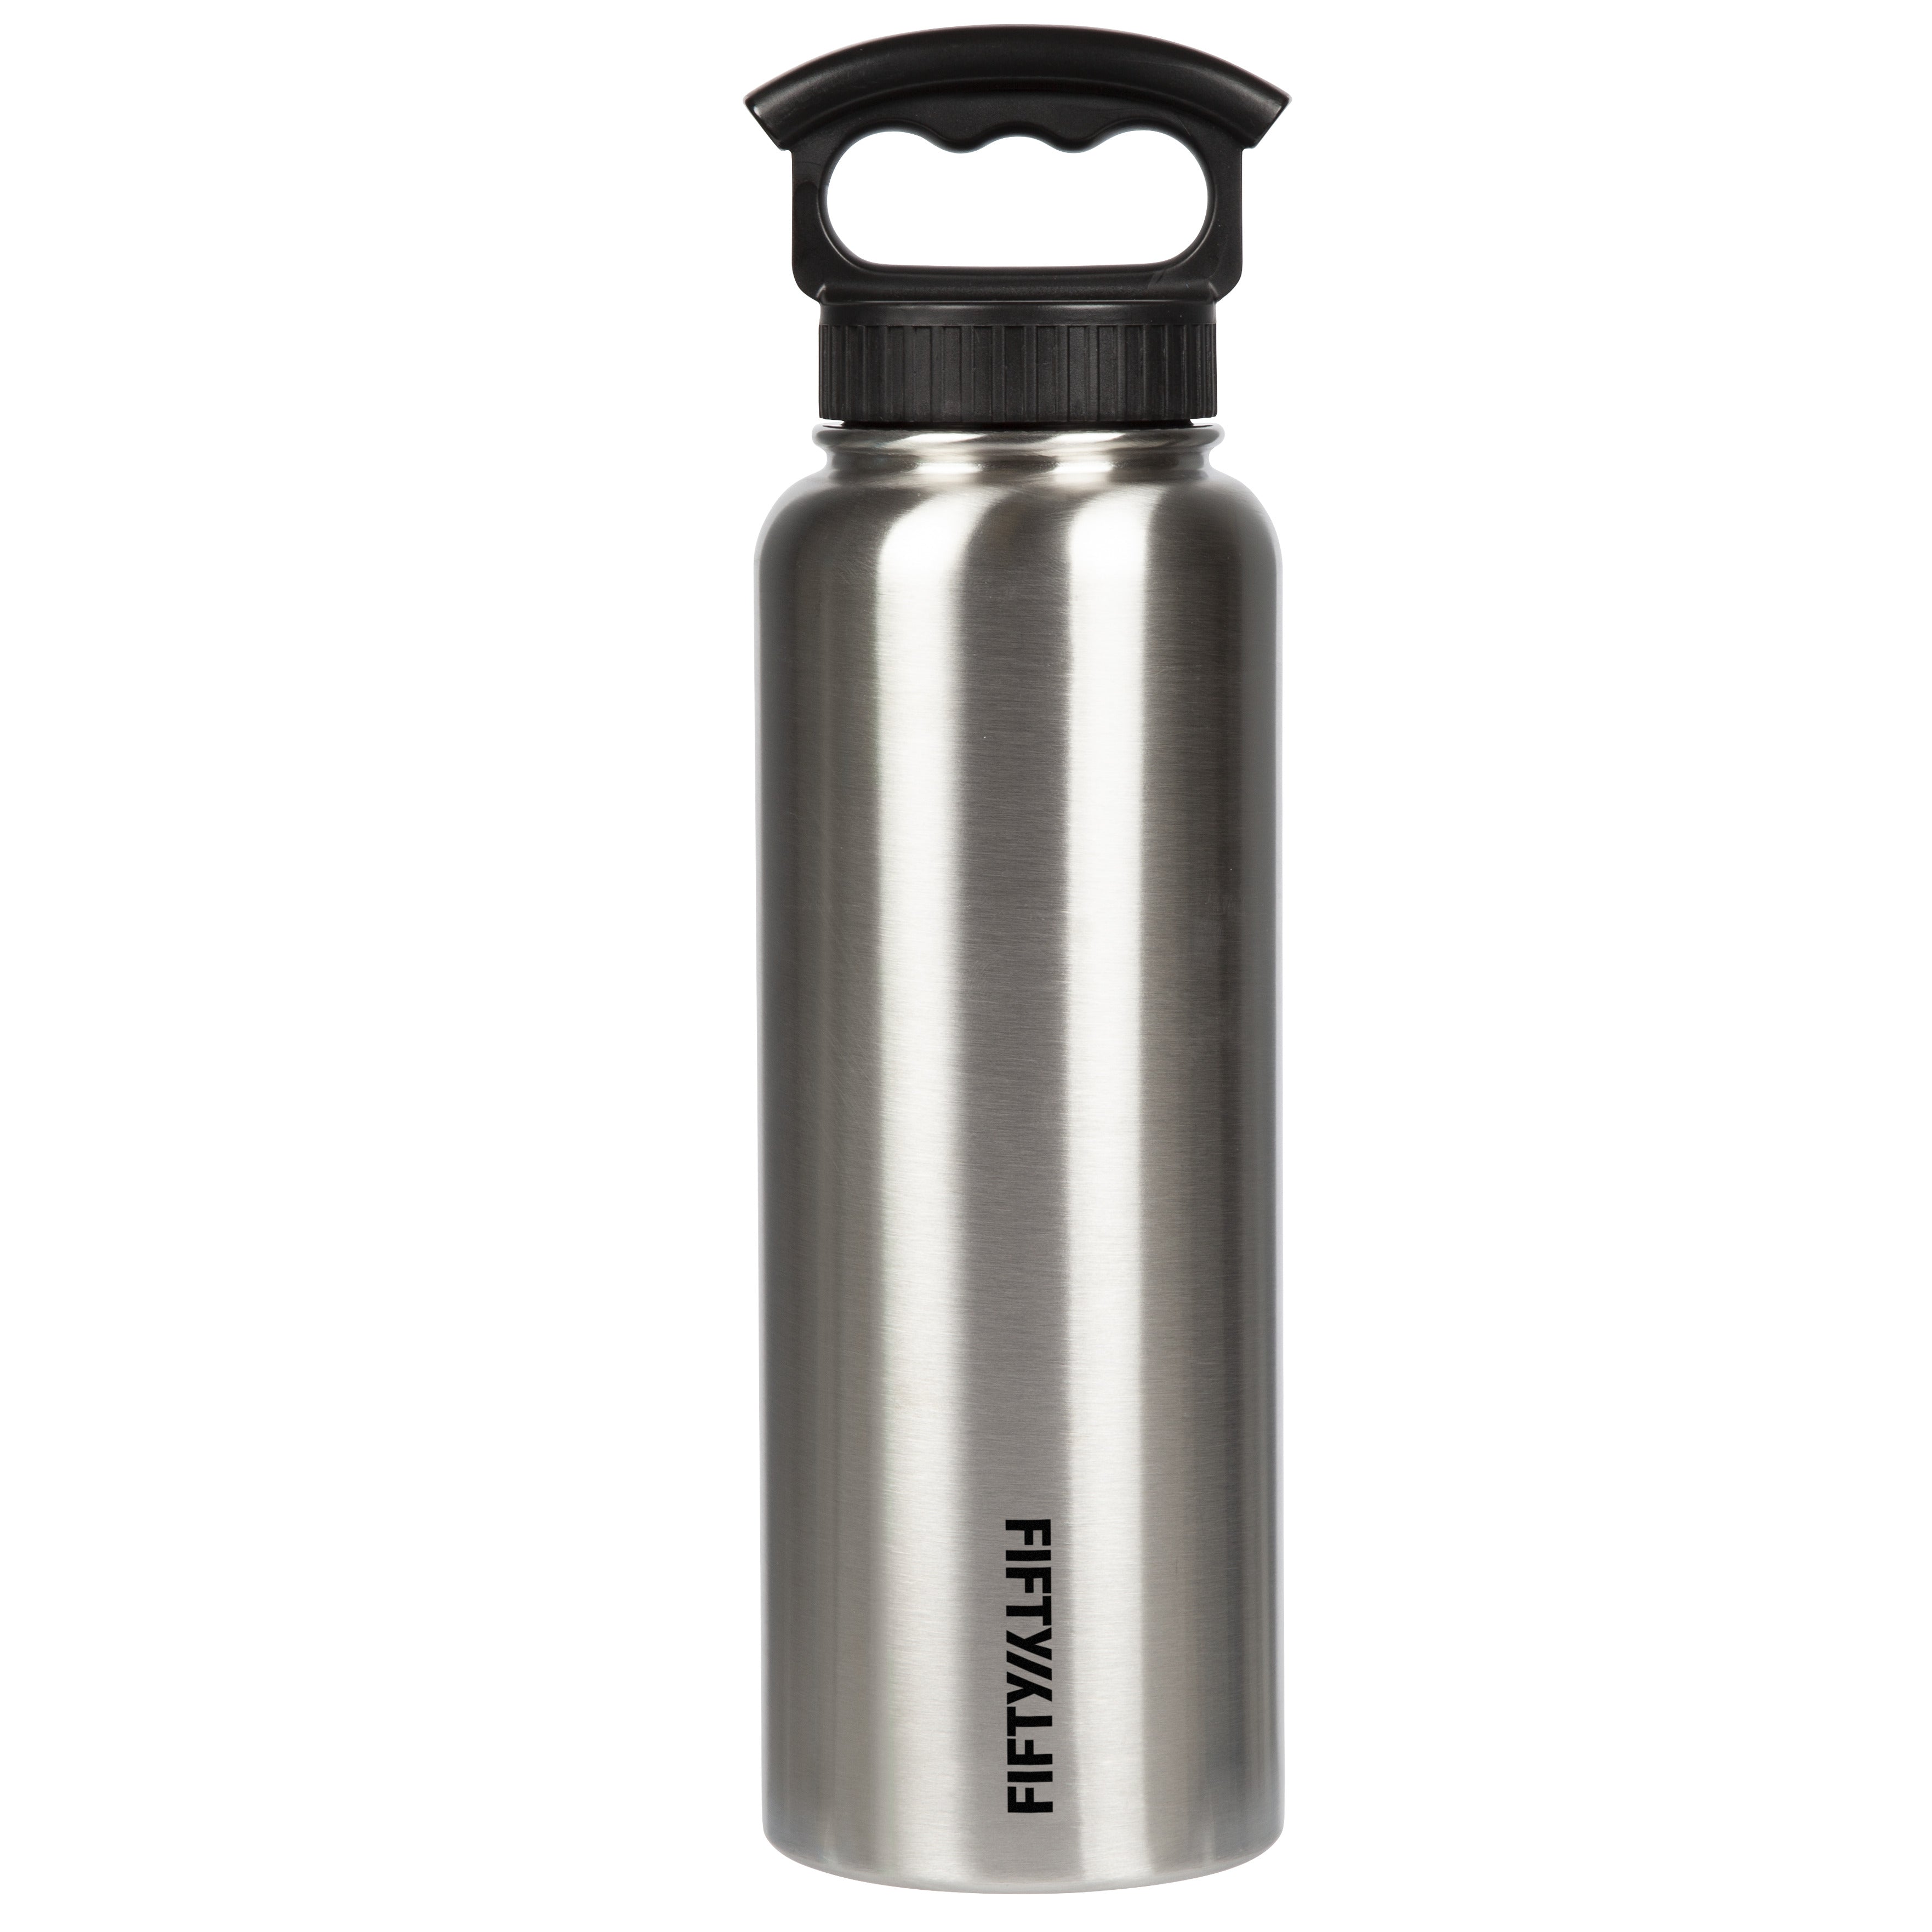 Fifty Fifty Stainless Steel Wide Mouth Water Bottle - 40 oz